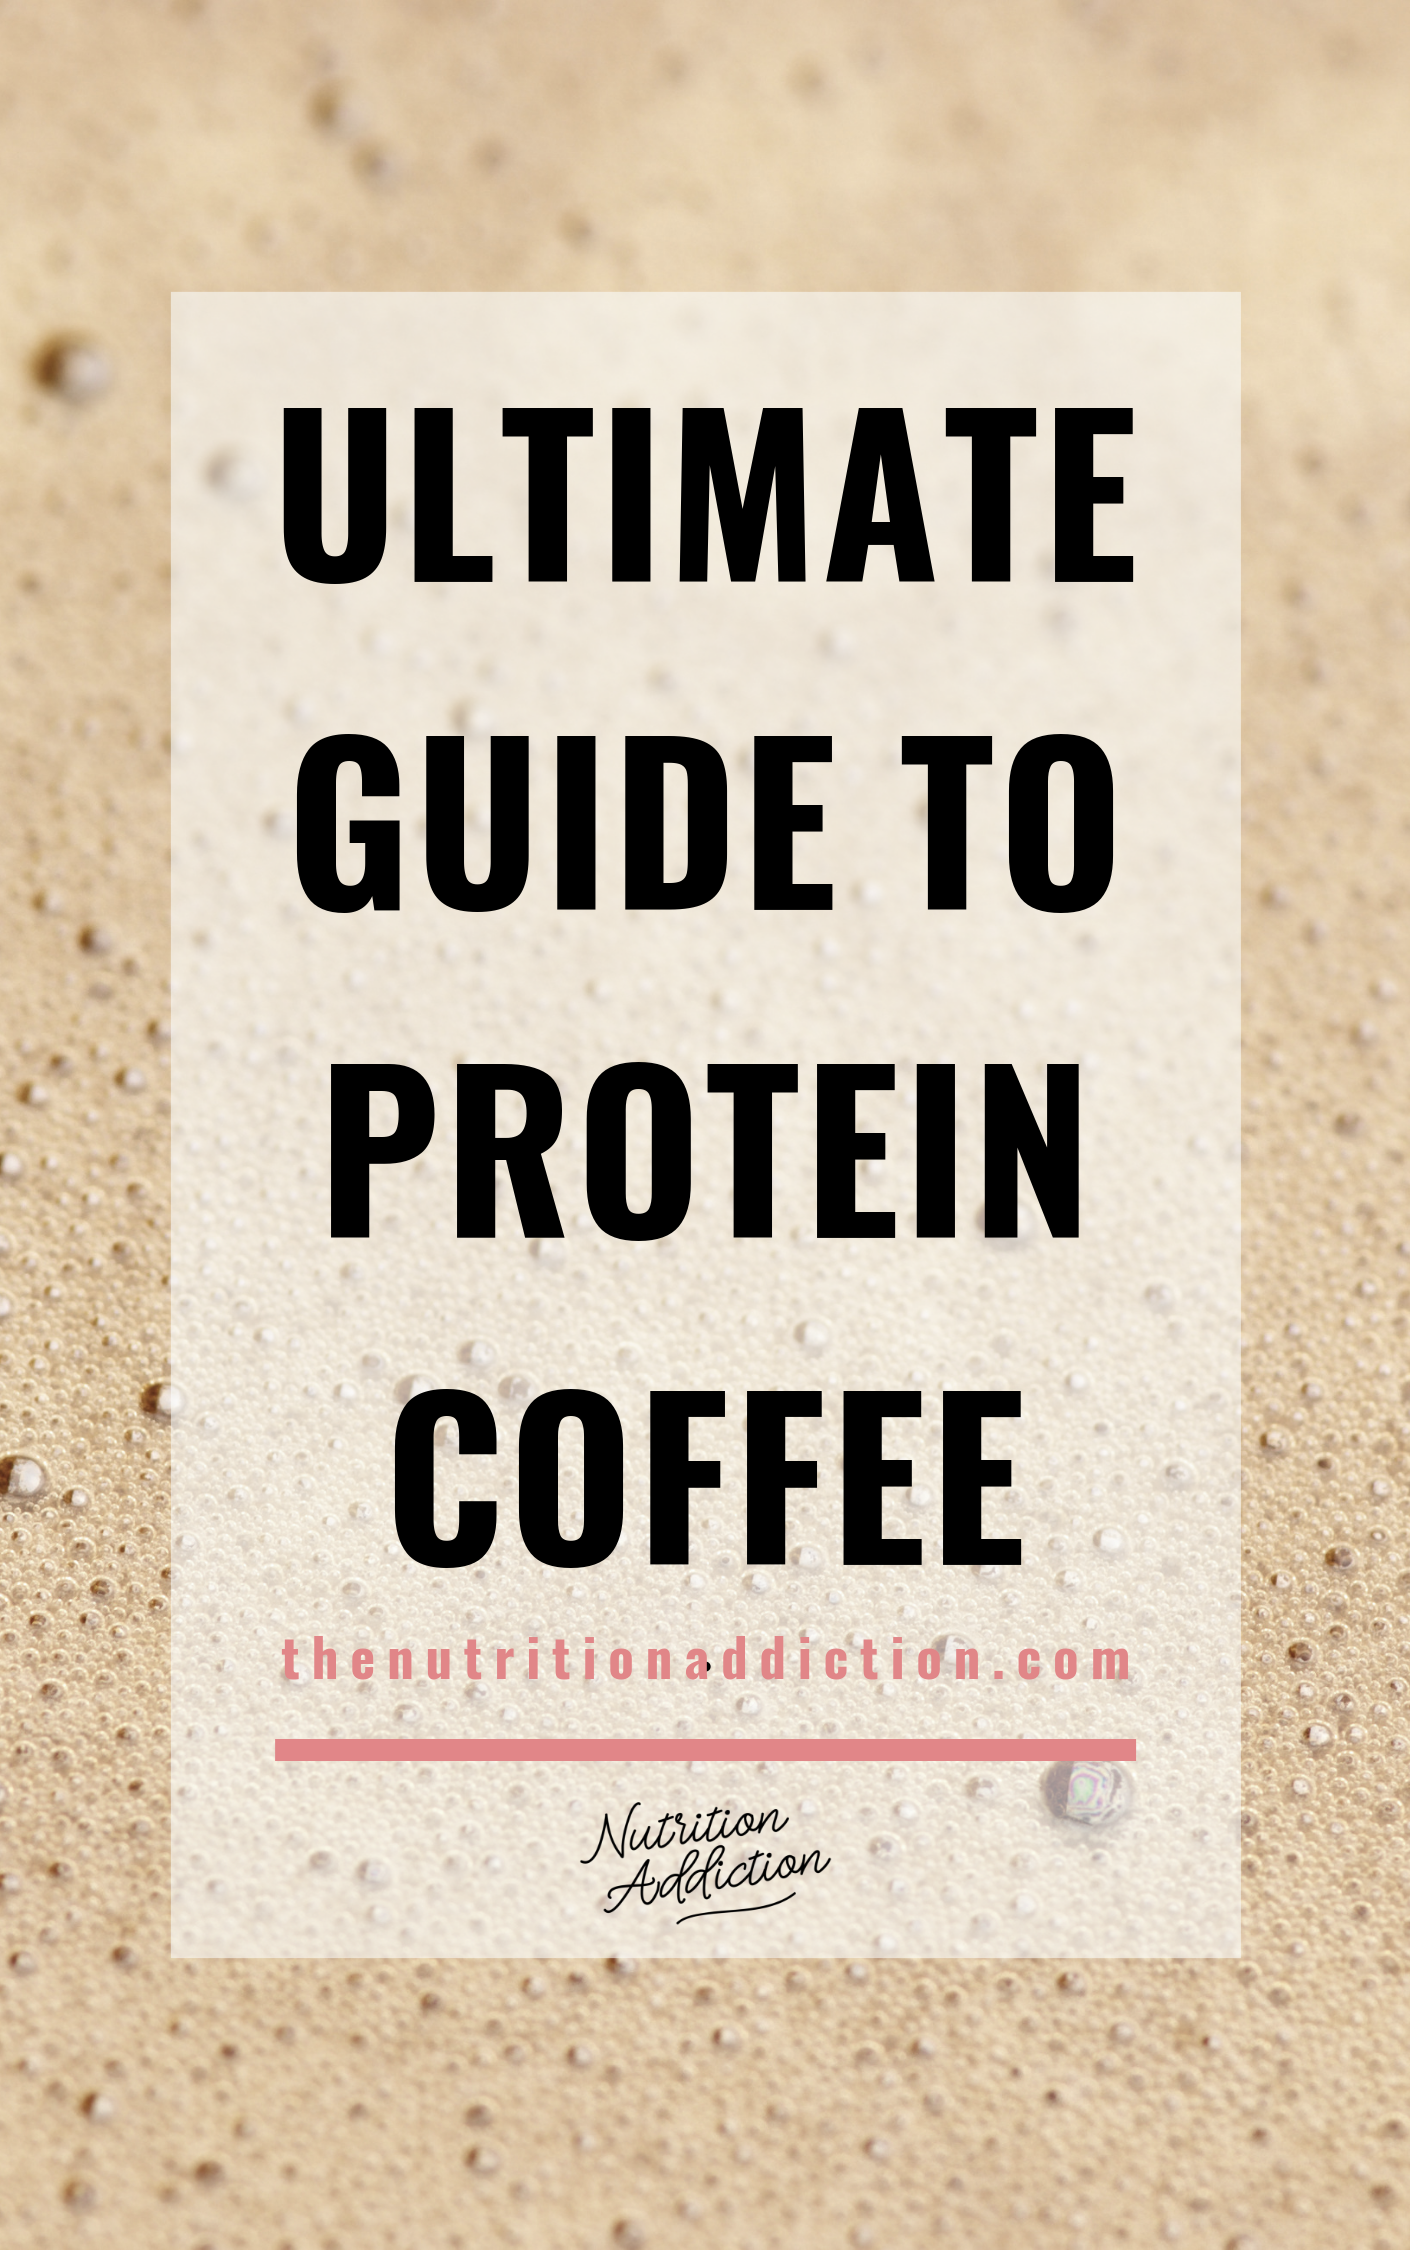 ULTIMATE GUIDE TO PROTEIN COFFEE